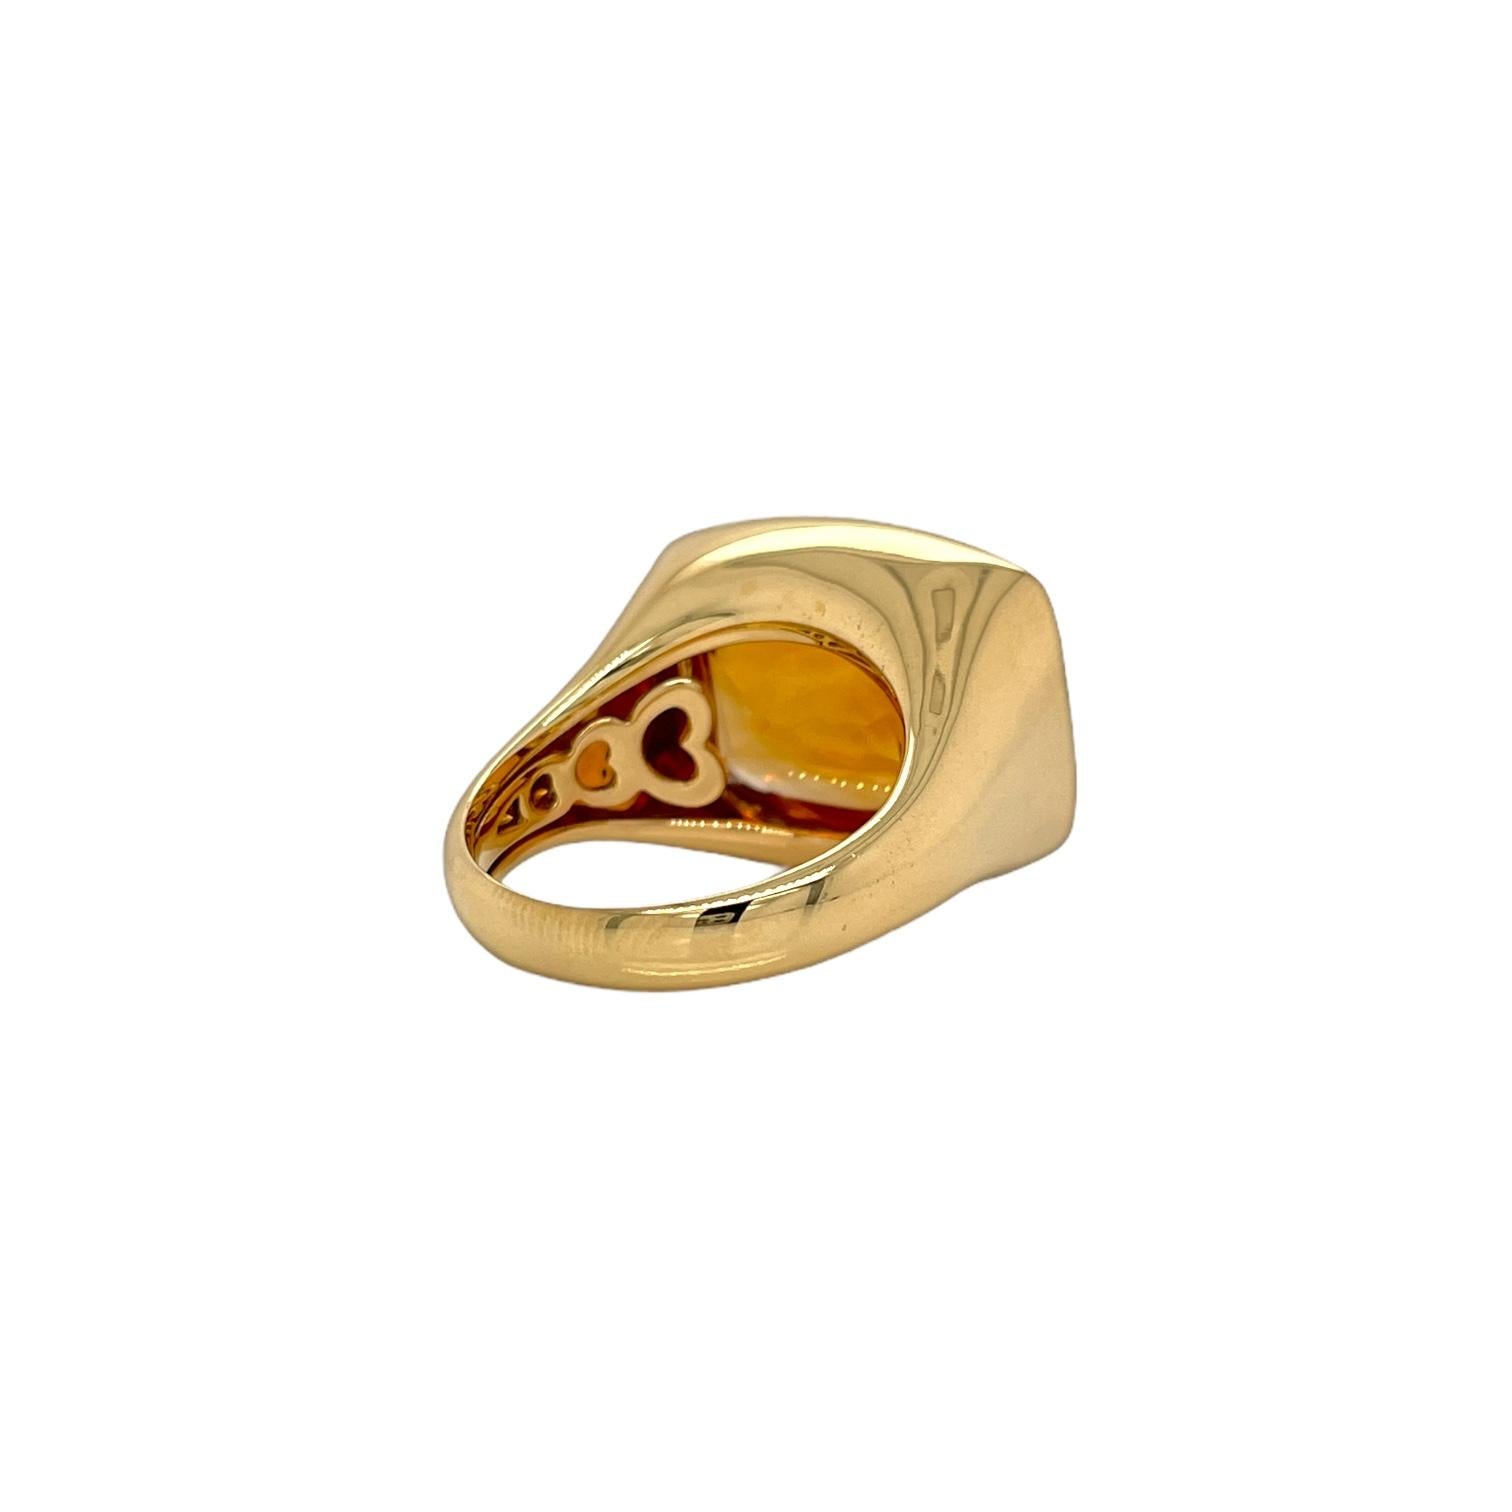 Ring contains one cabochon cut citrine, 19.12cts. Citrine measures approximately 14 x 17mm. Center stone is mounted in a handmade 18K yellow gold bezel setting with a tapered band. Ring is a finger size 7.5 and can be resized to desired measurement.